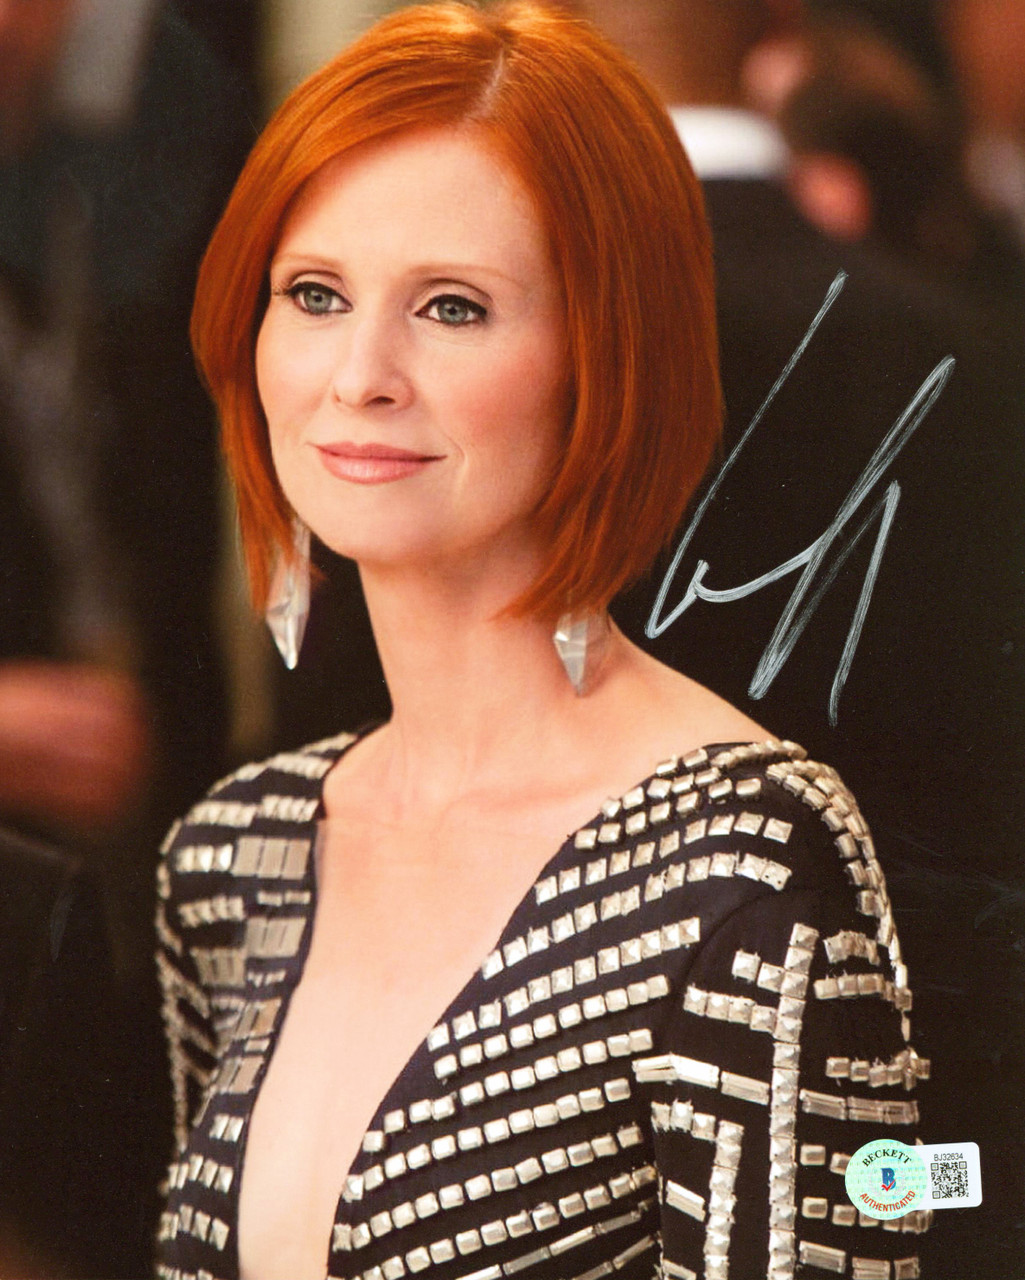 Cynthia Nixon Sex And The City Authentic Signed 8x10 Photo BAS #BJ32634 pic